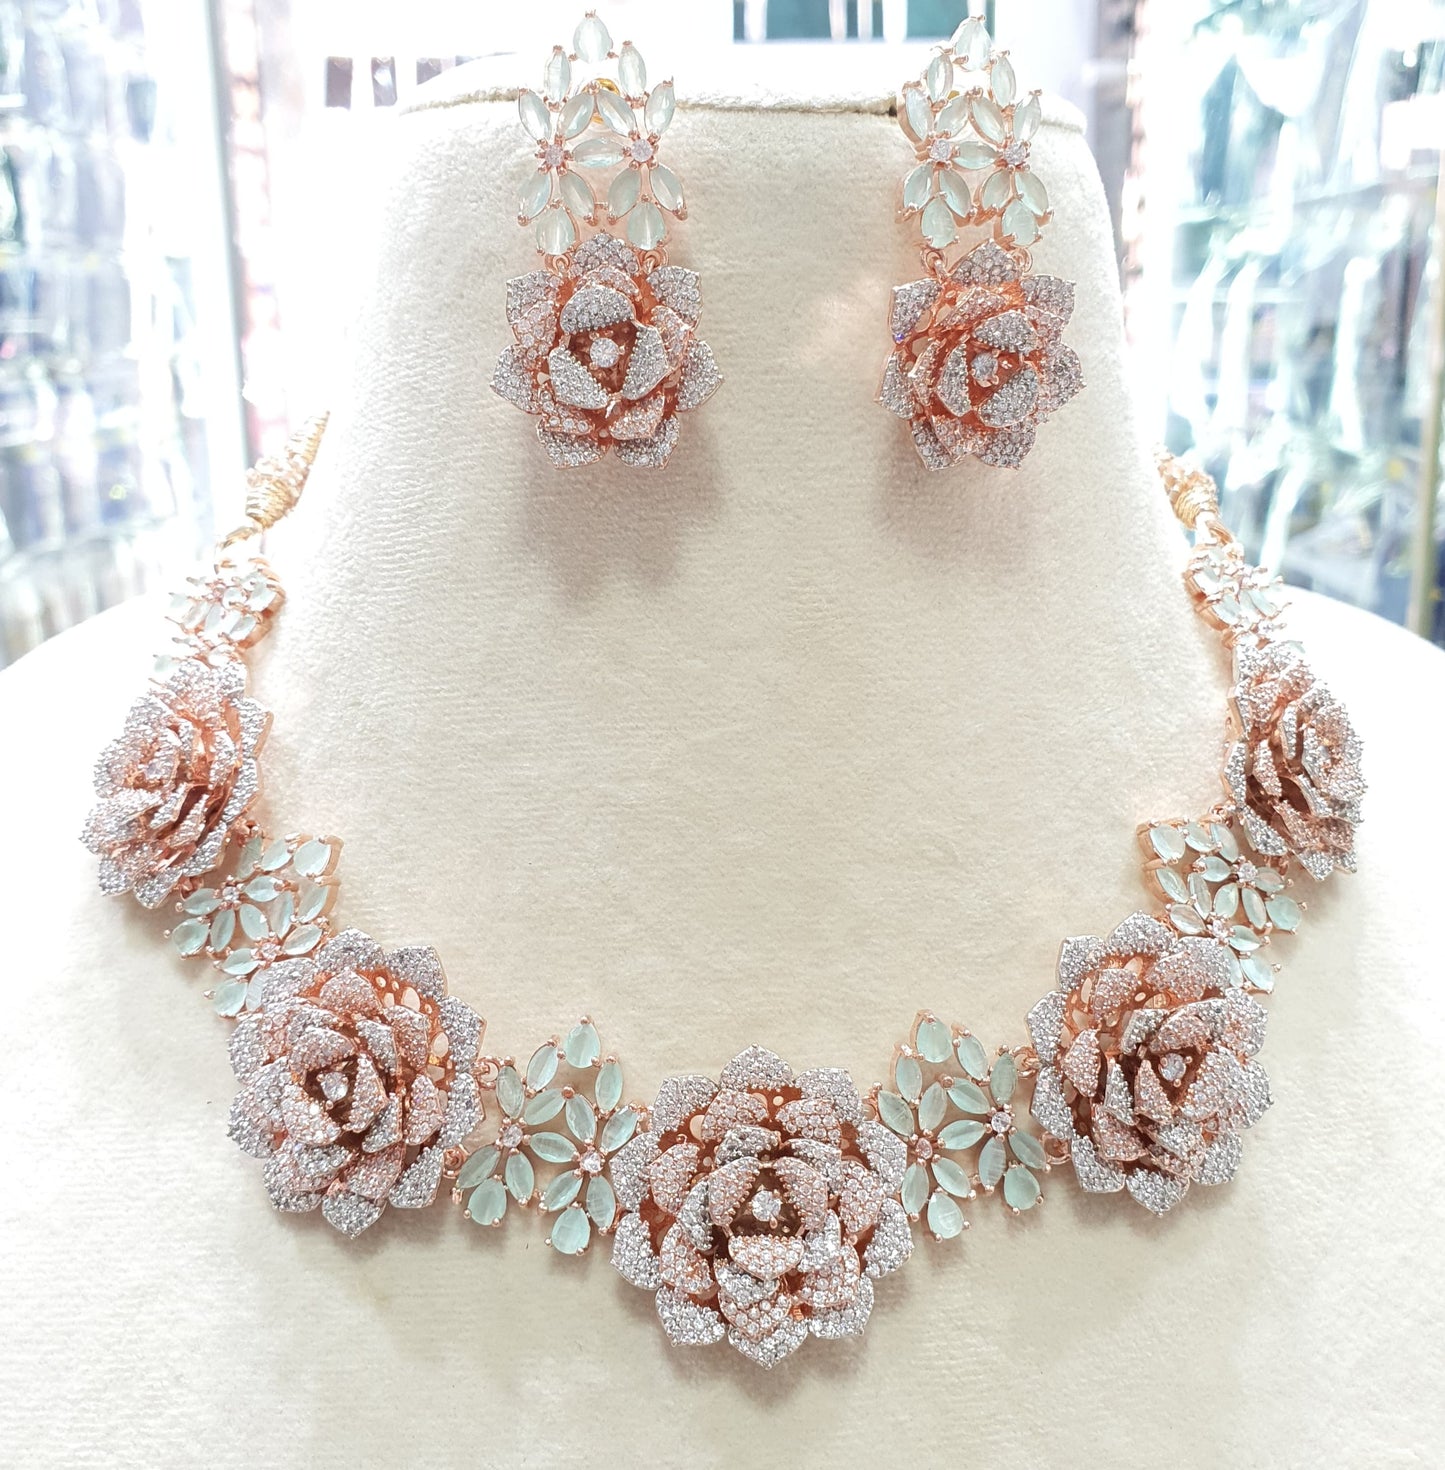 Amazing Flower Design American Diamond Stone Necklace Set with Earrings- RoseGold